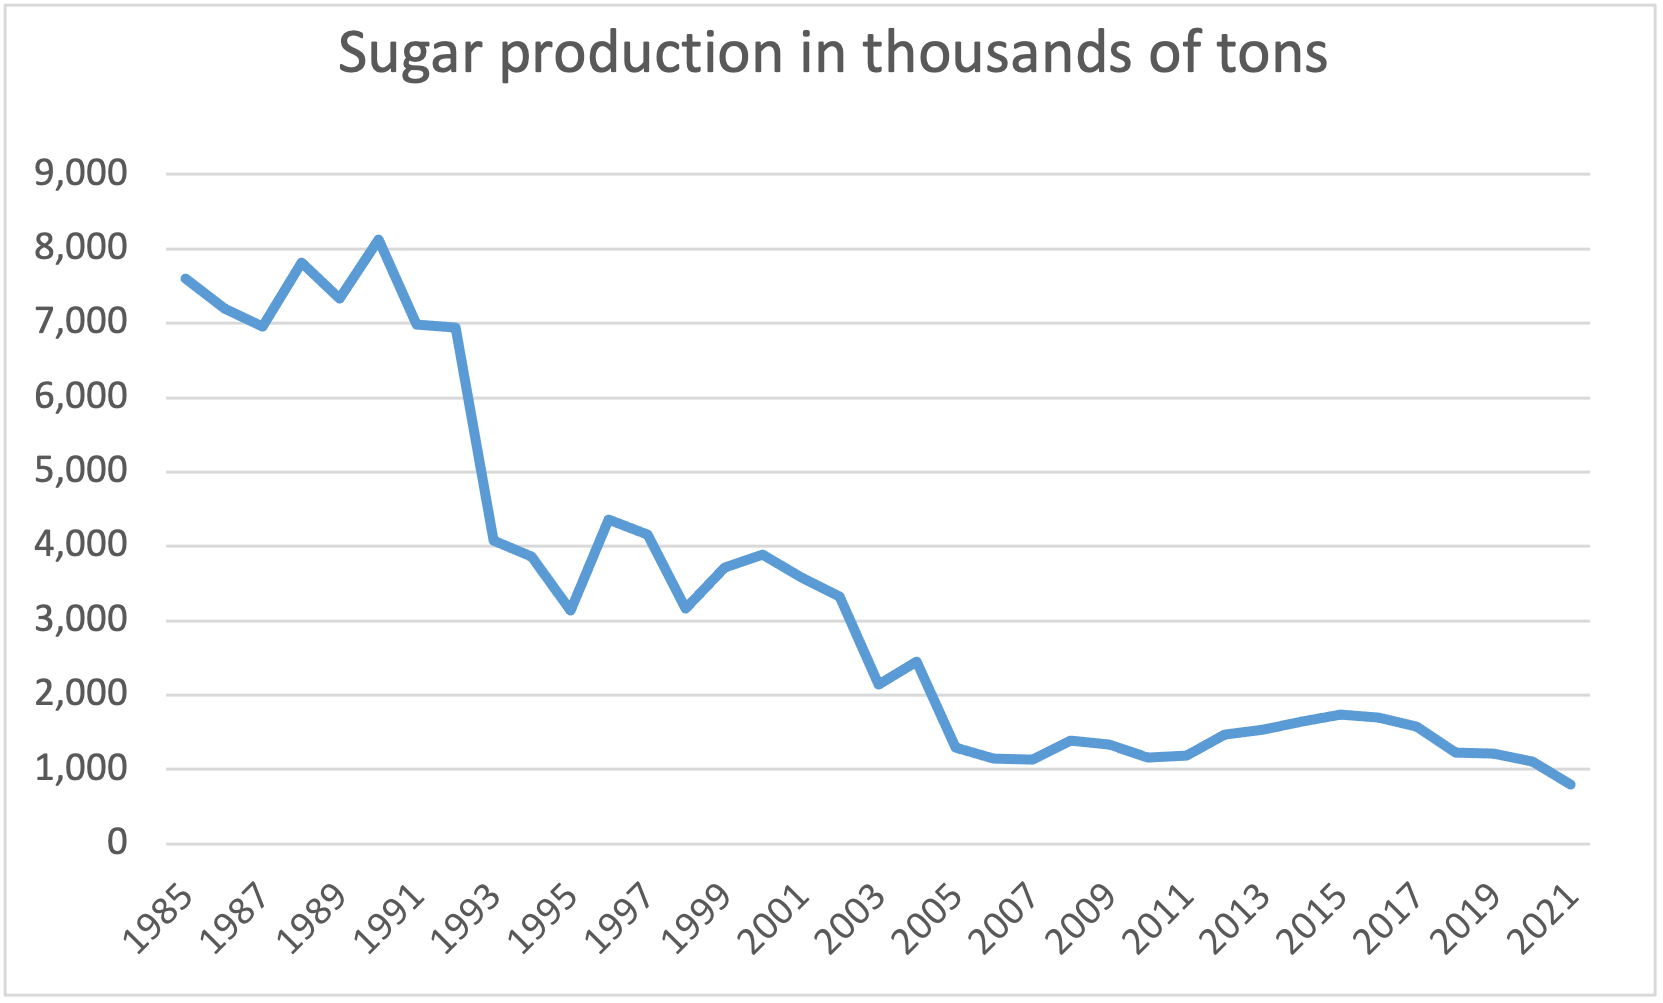 The graph shows the drop in production per ton of sugarcane from close to 8,000 tons in 1985 to less than 1,000 tons in 2021